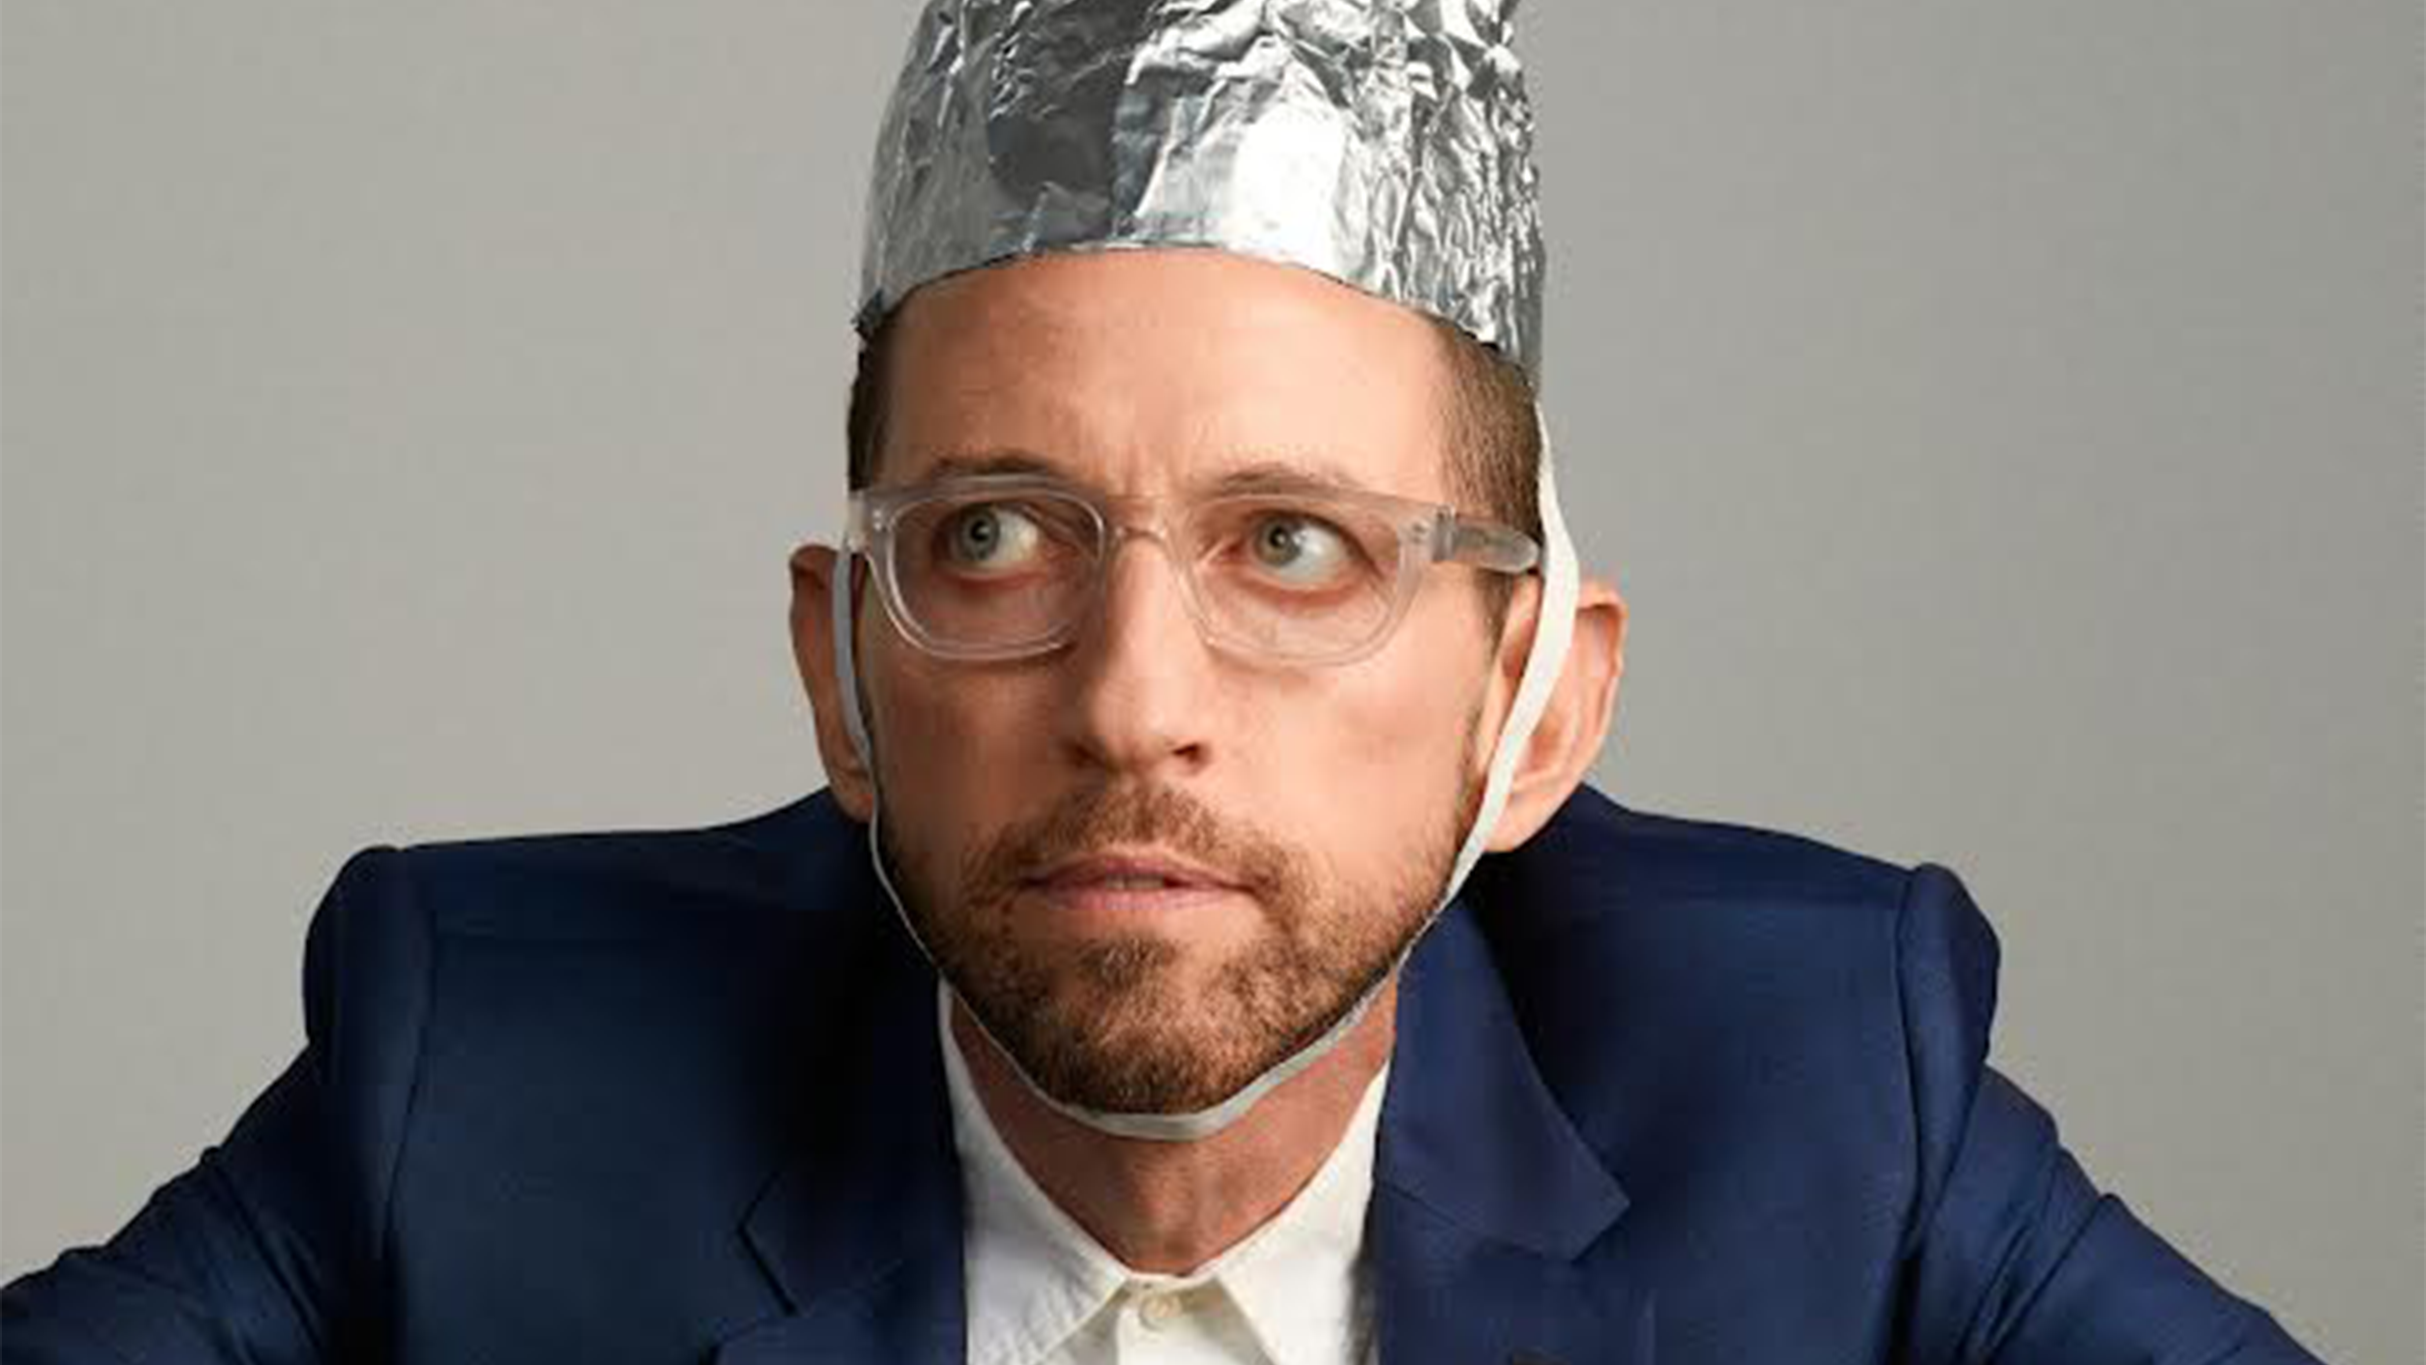 Neal Brennan: BRAND NEW NEAL in New York promo photo for Live Nation presale offer code